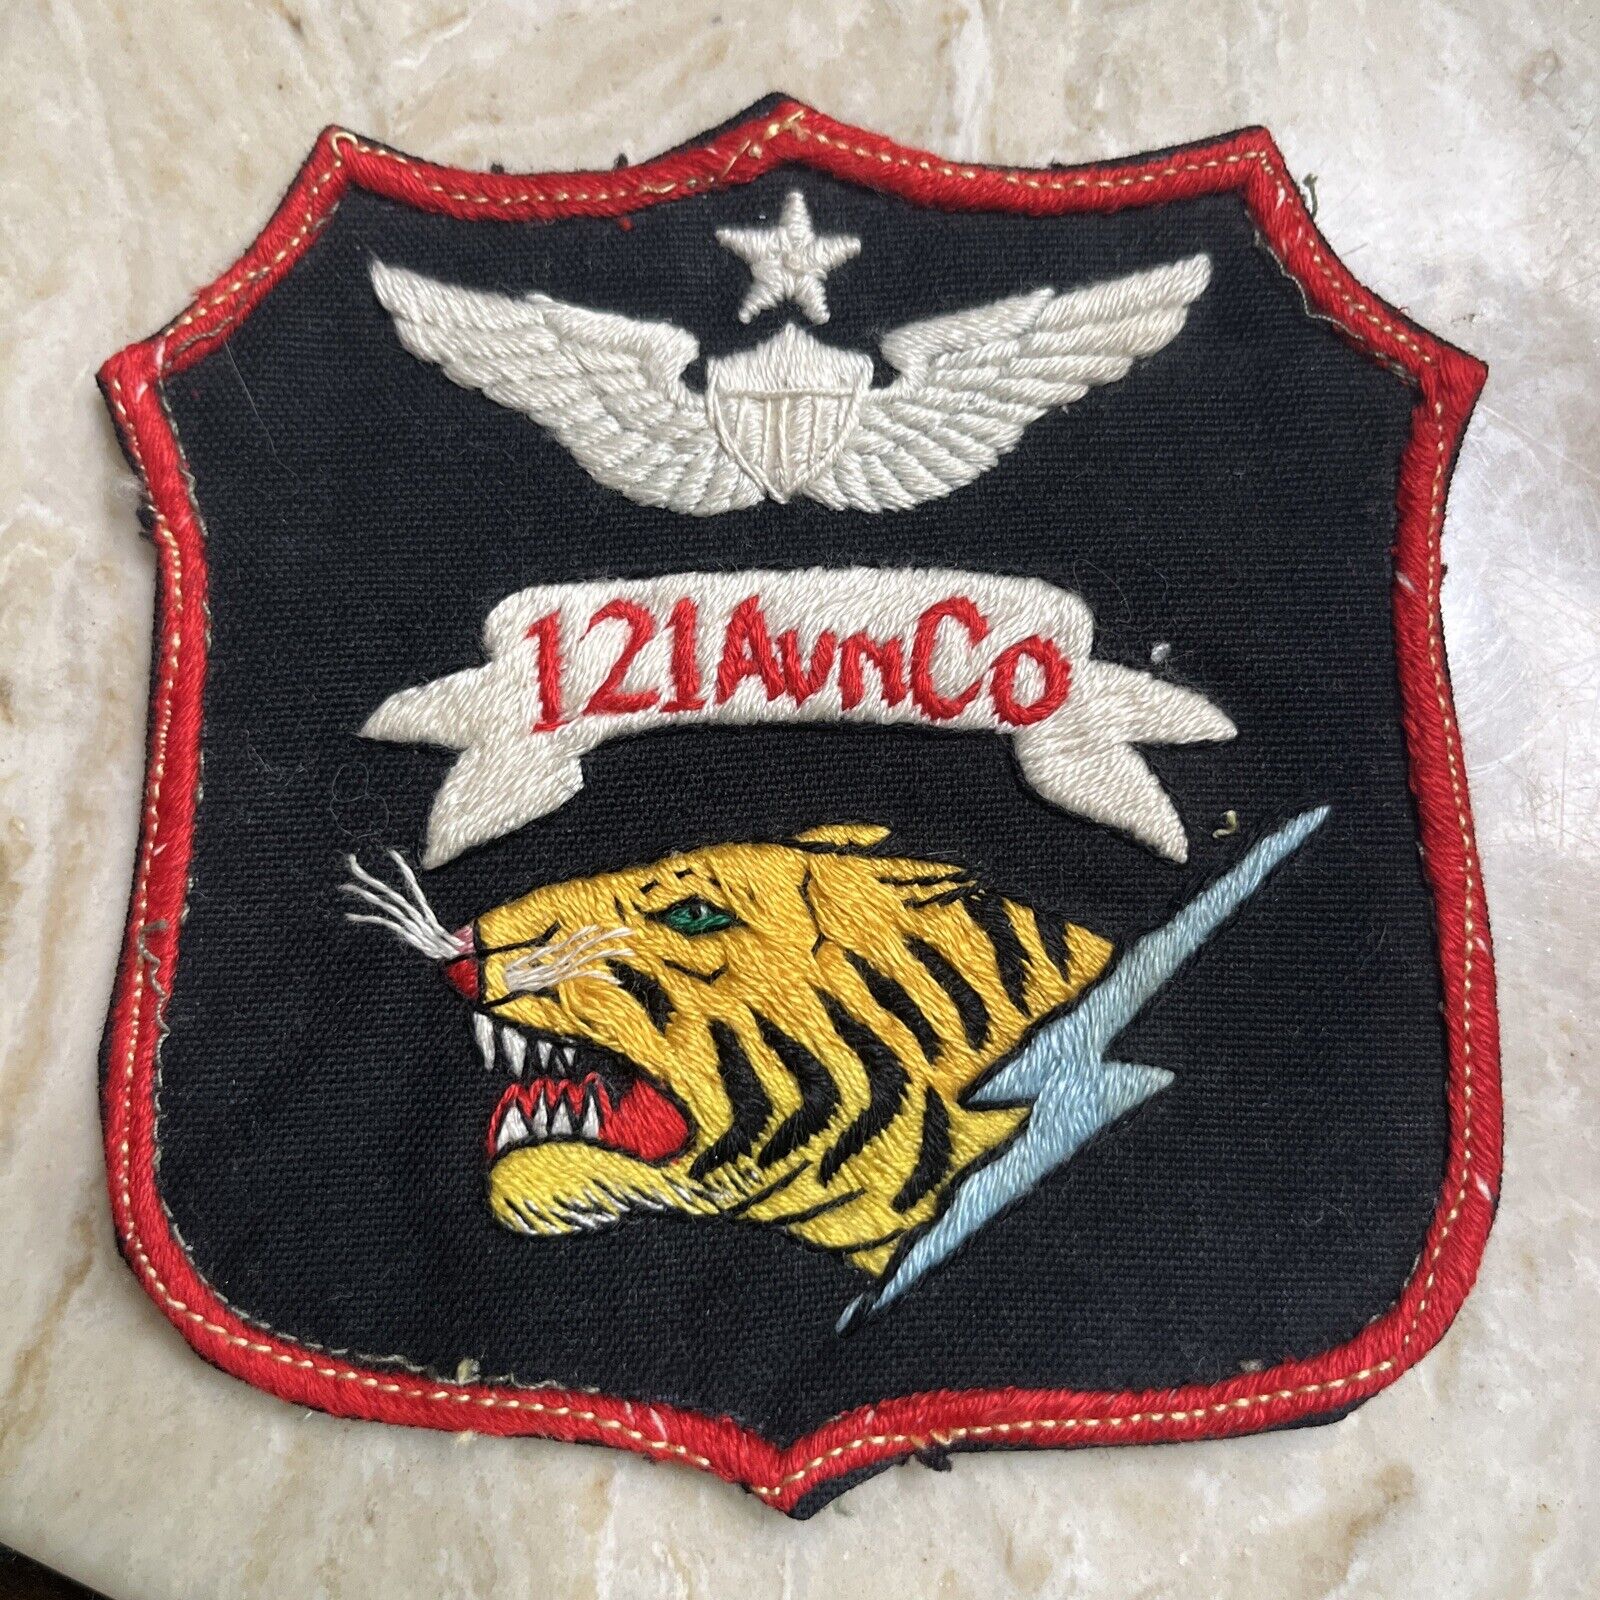 Guaranteed Original Vietnam War 121st Aviation Avn Co Hand Made Helicopter Patch